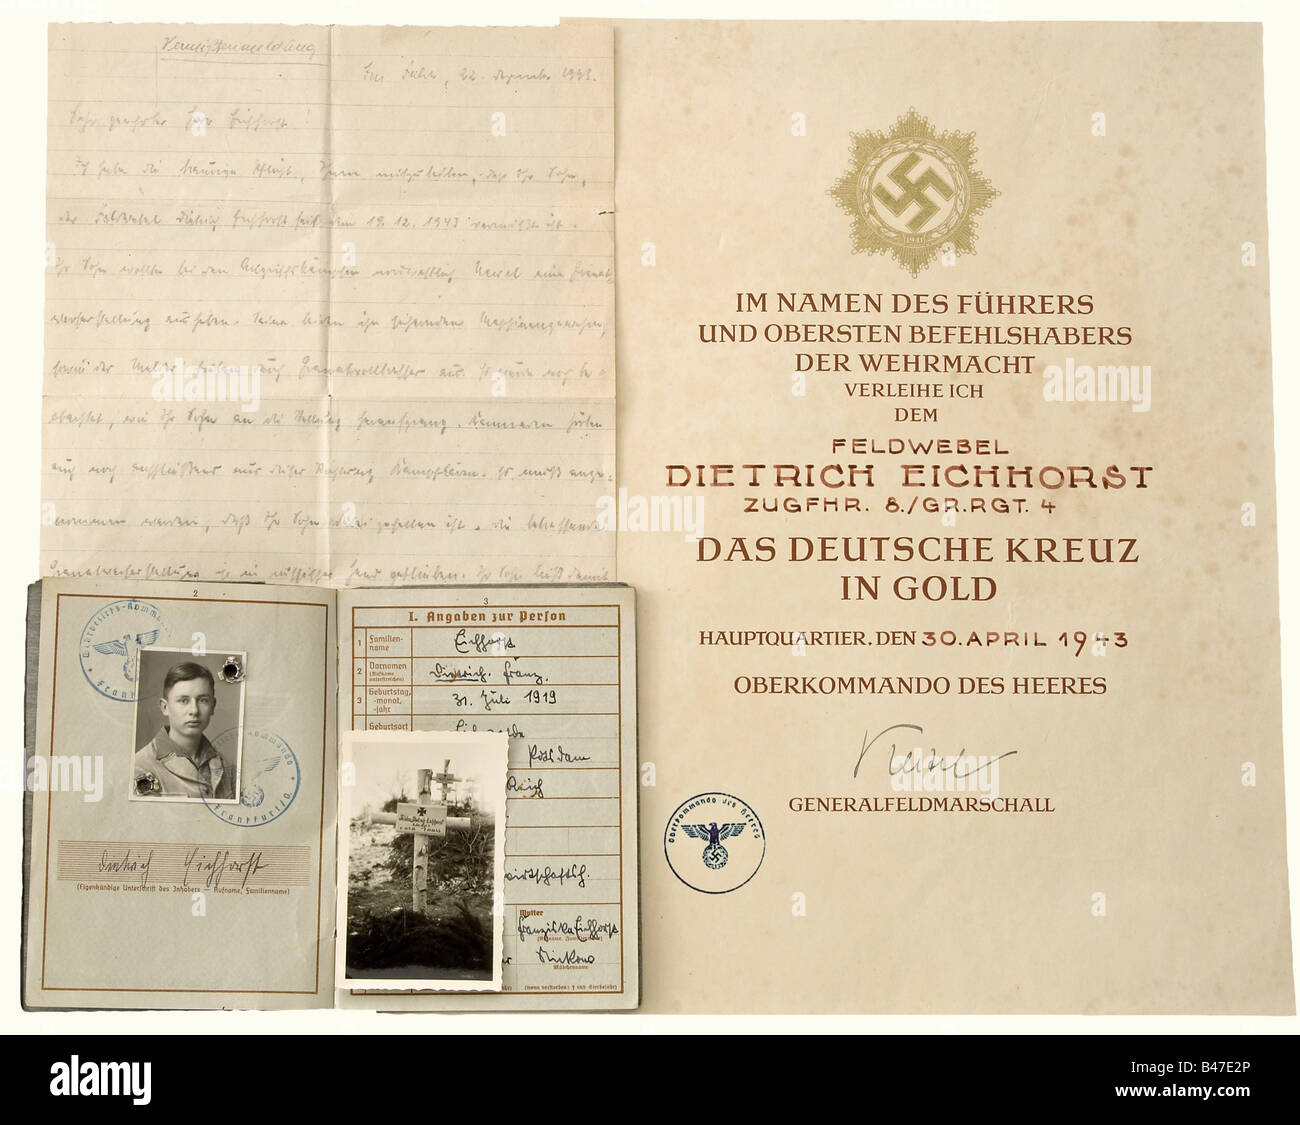 Dietrich Eichhorst - service record and documents, of the Staff Sergeant and platoon leader in the 8./Gr.Rgt. 4. Service record with all entries from 1937 until his death on Dec. 19, 1943 north-west of Newels after the evacuation of the Demjansk area. Detailed entries for combats and his awards like German Cross in Gold, Wound Badge in Silver etc. As well as two handwritten letters of condolence to his father from his lieutenant and company leader Merbach, describing the circumstances of his death, a photograph of his grave, and the award certificate to the Ger, Stock Photo